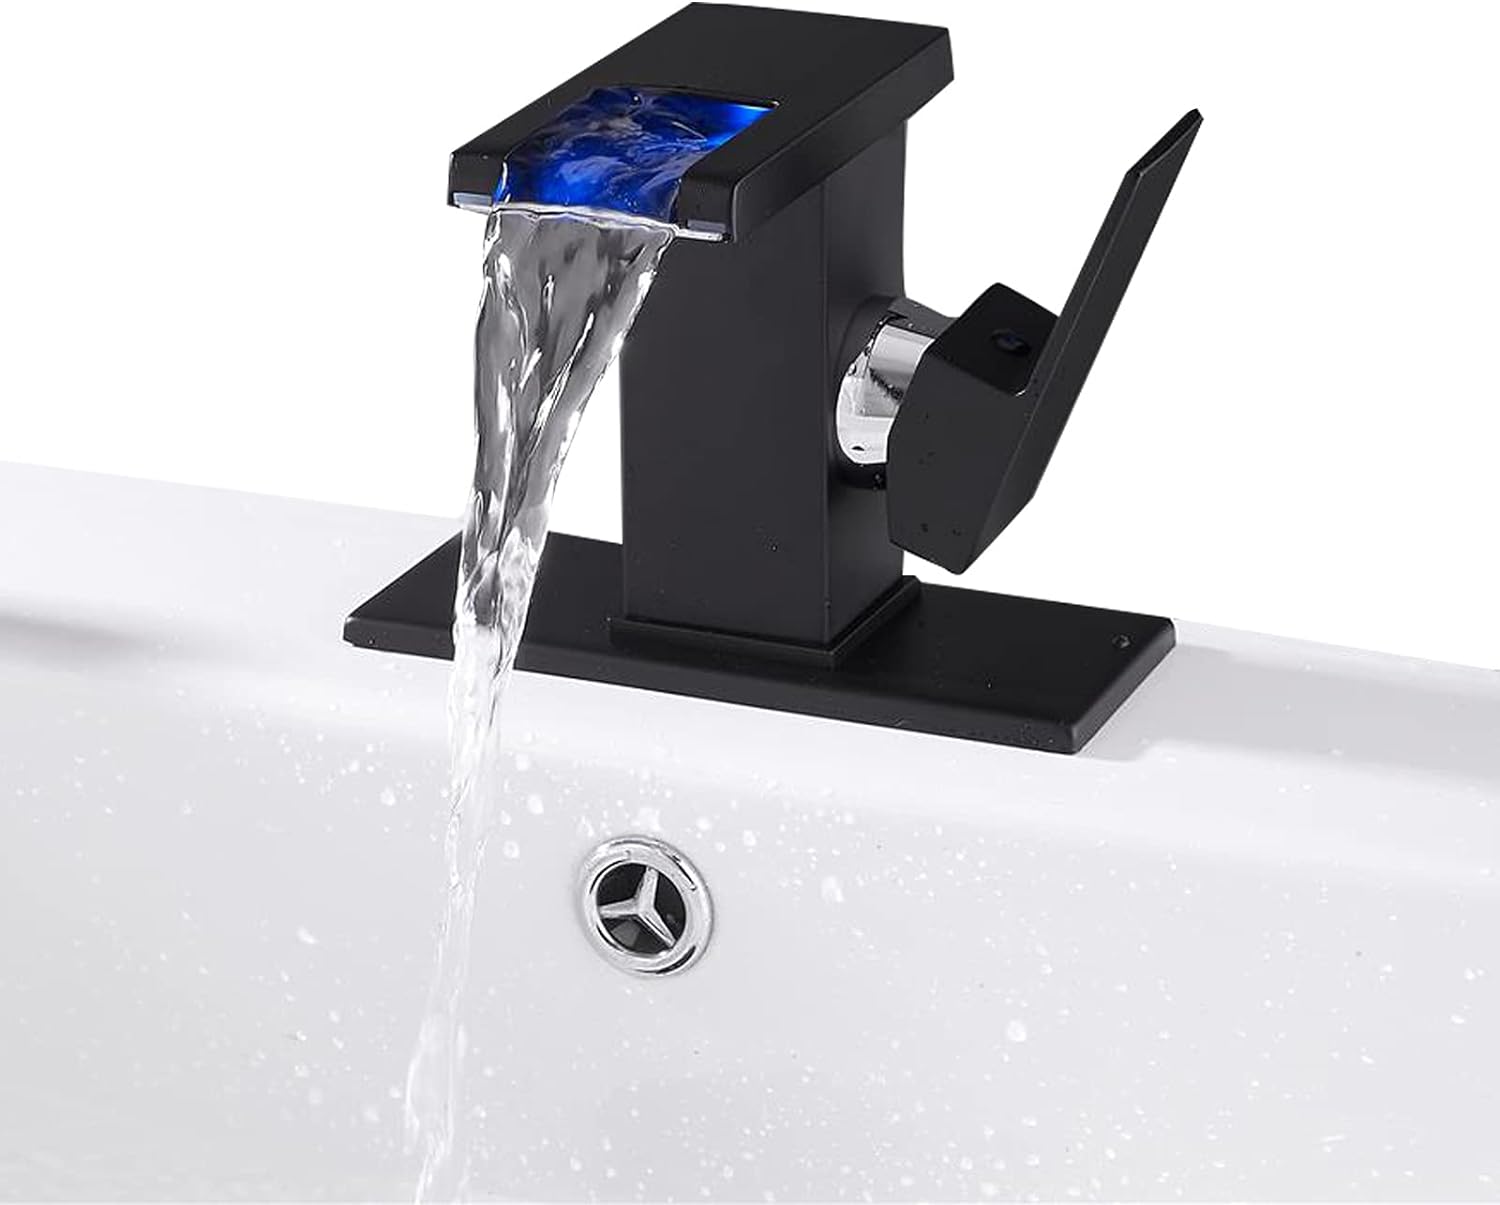 LED Light Bathroom Faucet Waterfall Black One Hole Single Handle Faucet for Bathroom Sink Mount Vanity Faucet Lead-Free for Commercial Residential